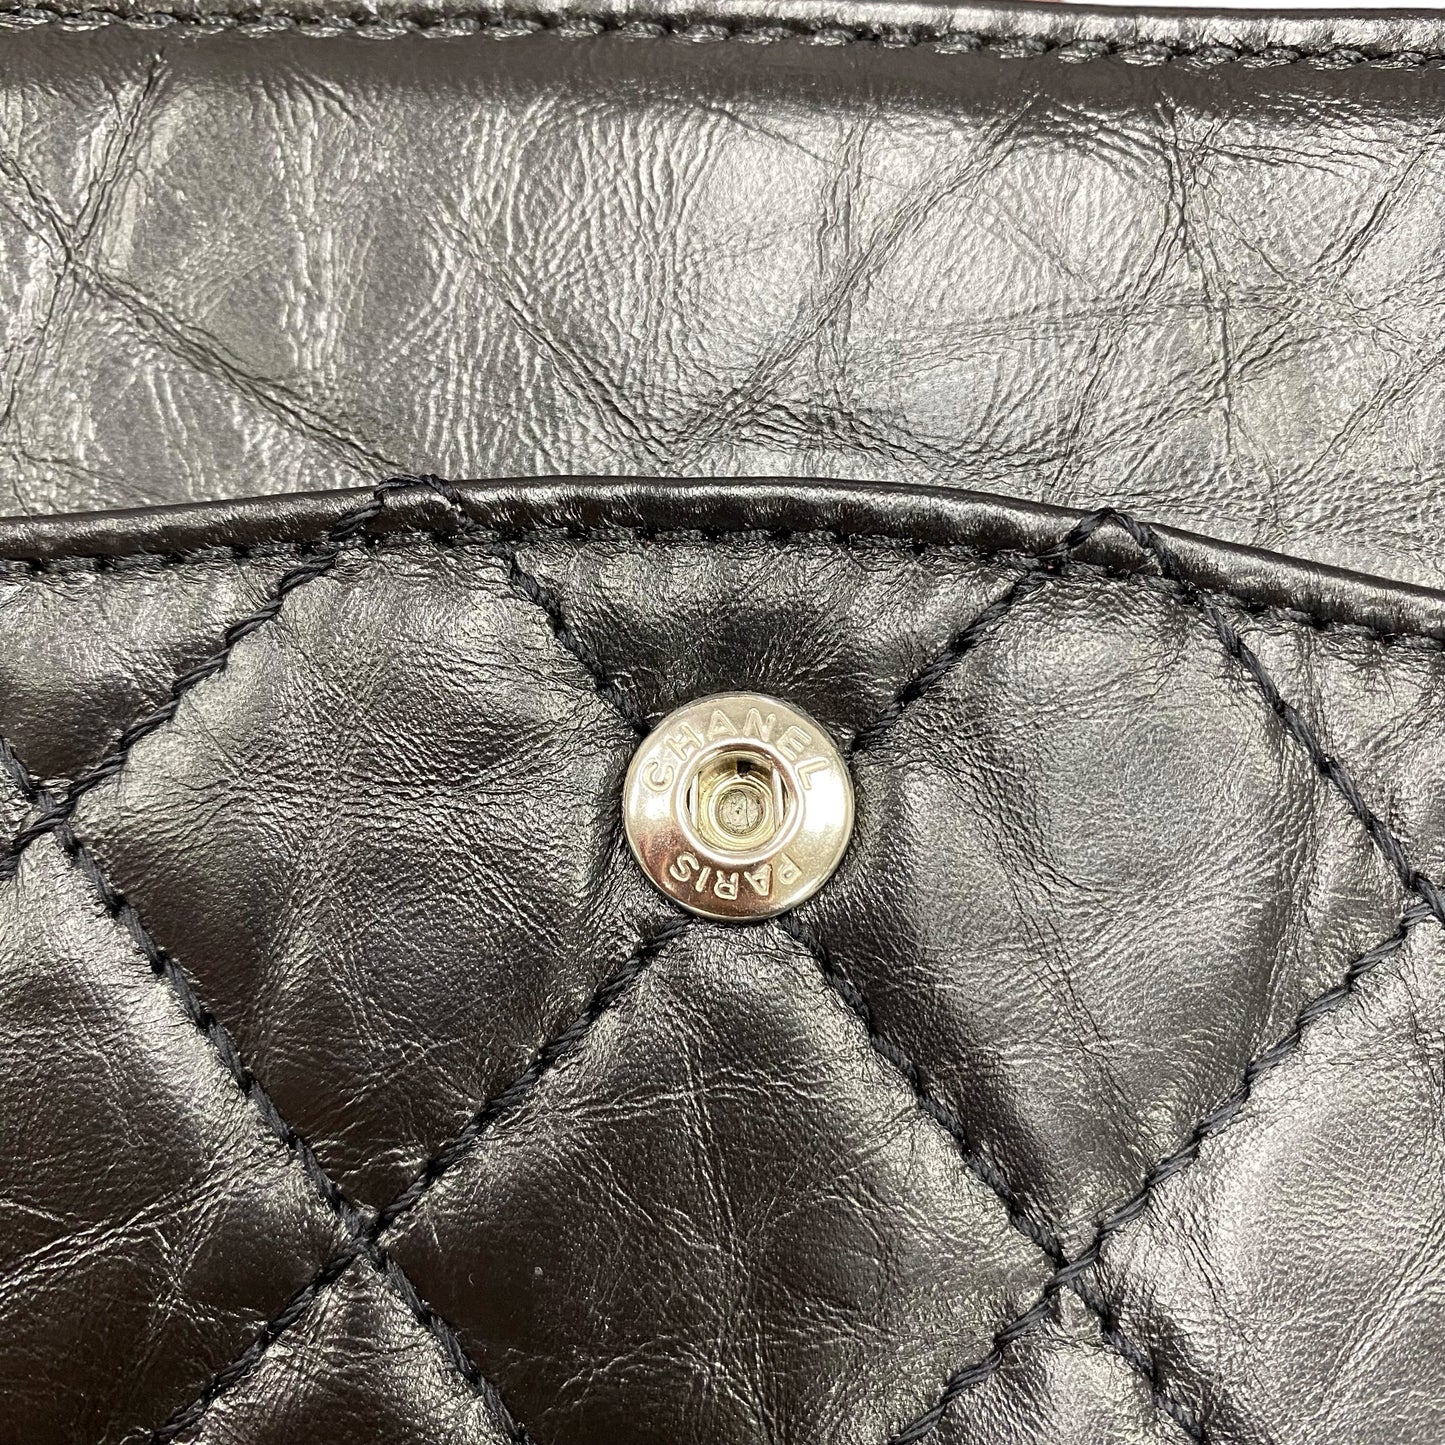 Handbag Luxury Designer Chanel Double Flap Quilted Reissued 2.55, Size Large